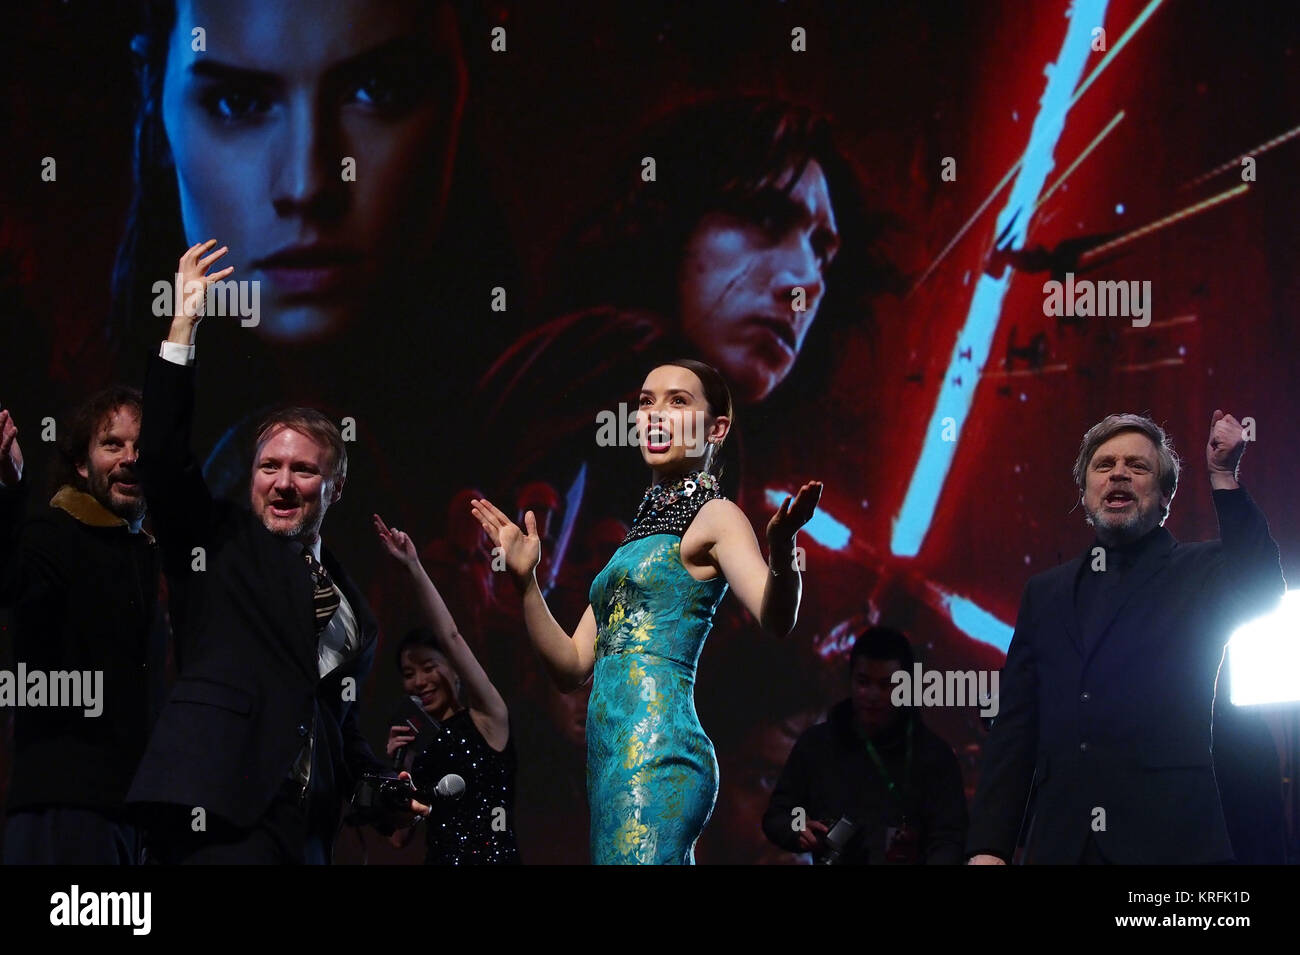 Shanghai, Dec. 20. 5th Jan, 2018. Israeli producer Ram Bergman, U.S. director Rian Johnson, British actress Daisy Ridley, U.S. actor Mark Hamill (L-R) pose for pictures at the Chinese premiere of 'Star Wars: The Last Jedi' at the Shanghai Disney Resort in east China's Shanghai, Dec. 20, 2017. The film will be screened in China on Jan. 5, 2018. Credit: Ren Long/Xinhua/Alamy Live News Stock Photo